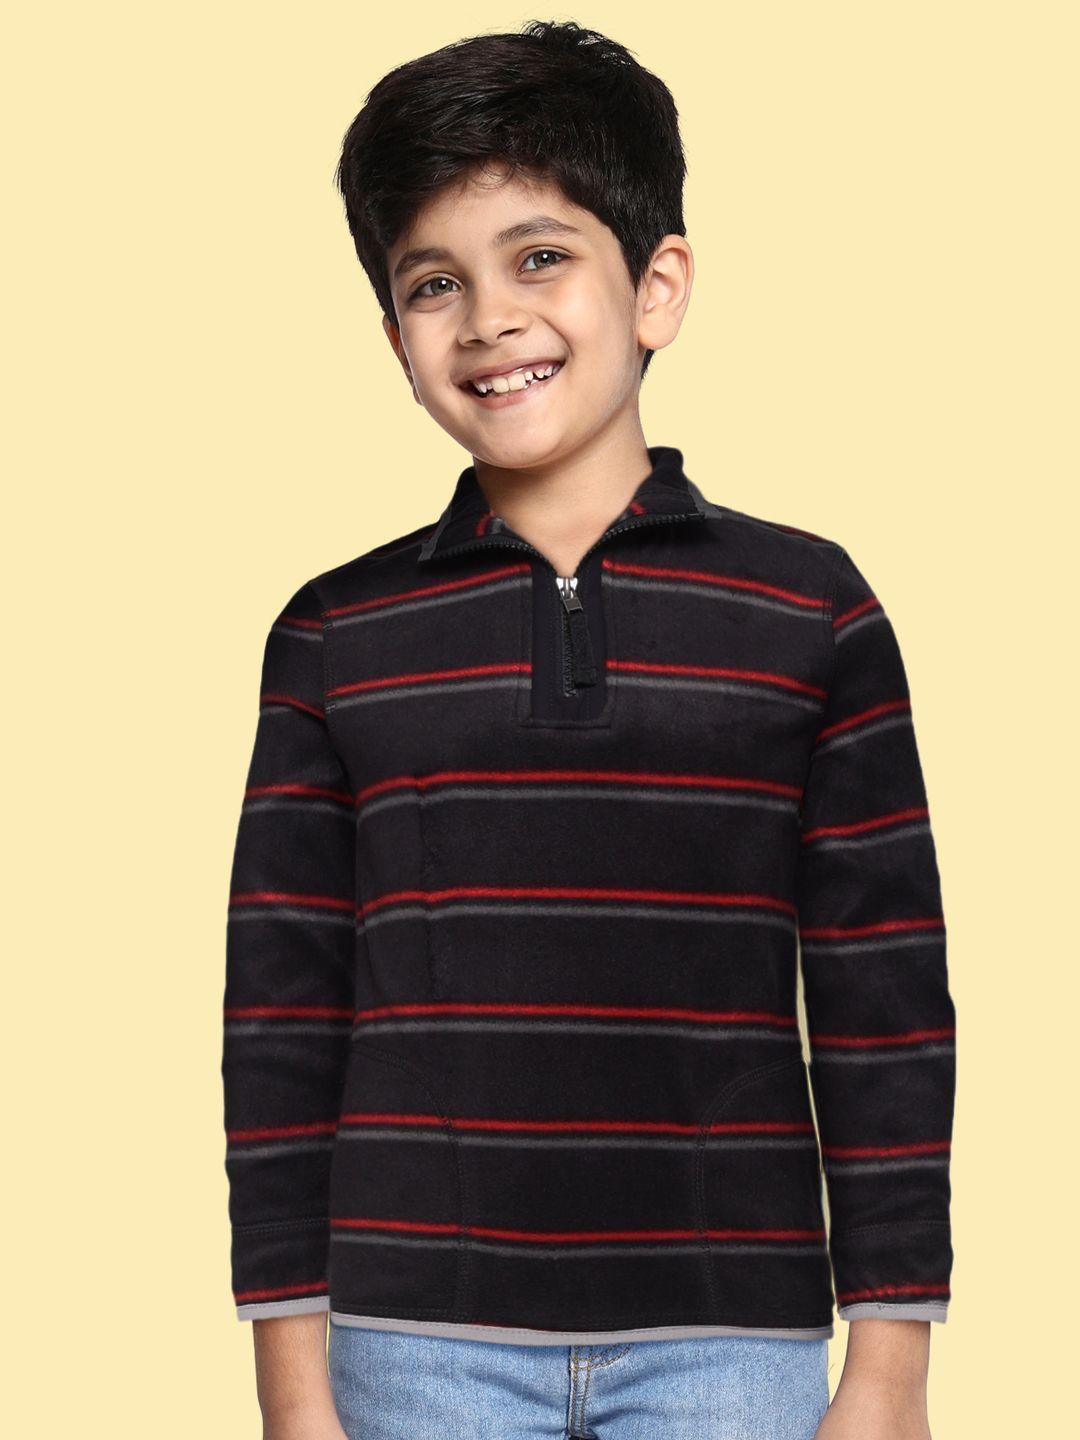 marks-&-spencer-boys-charcoal-grey-&-red-striped-sweatshirt